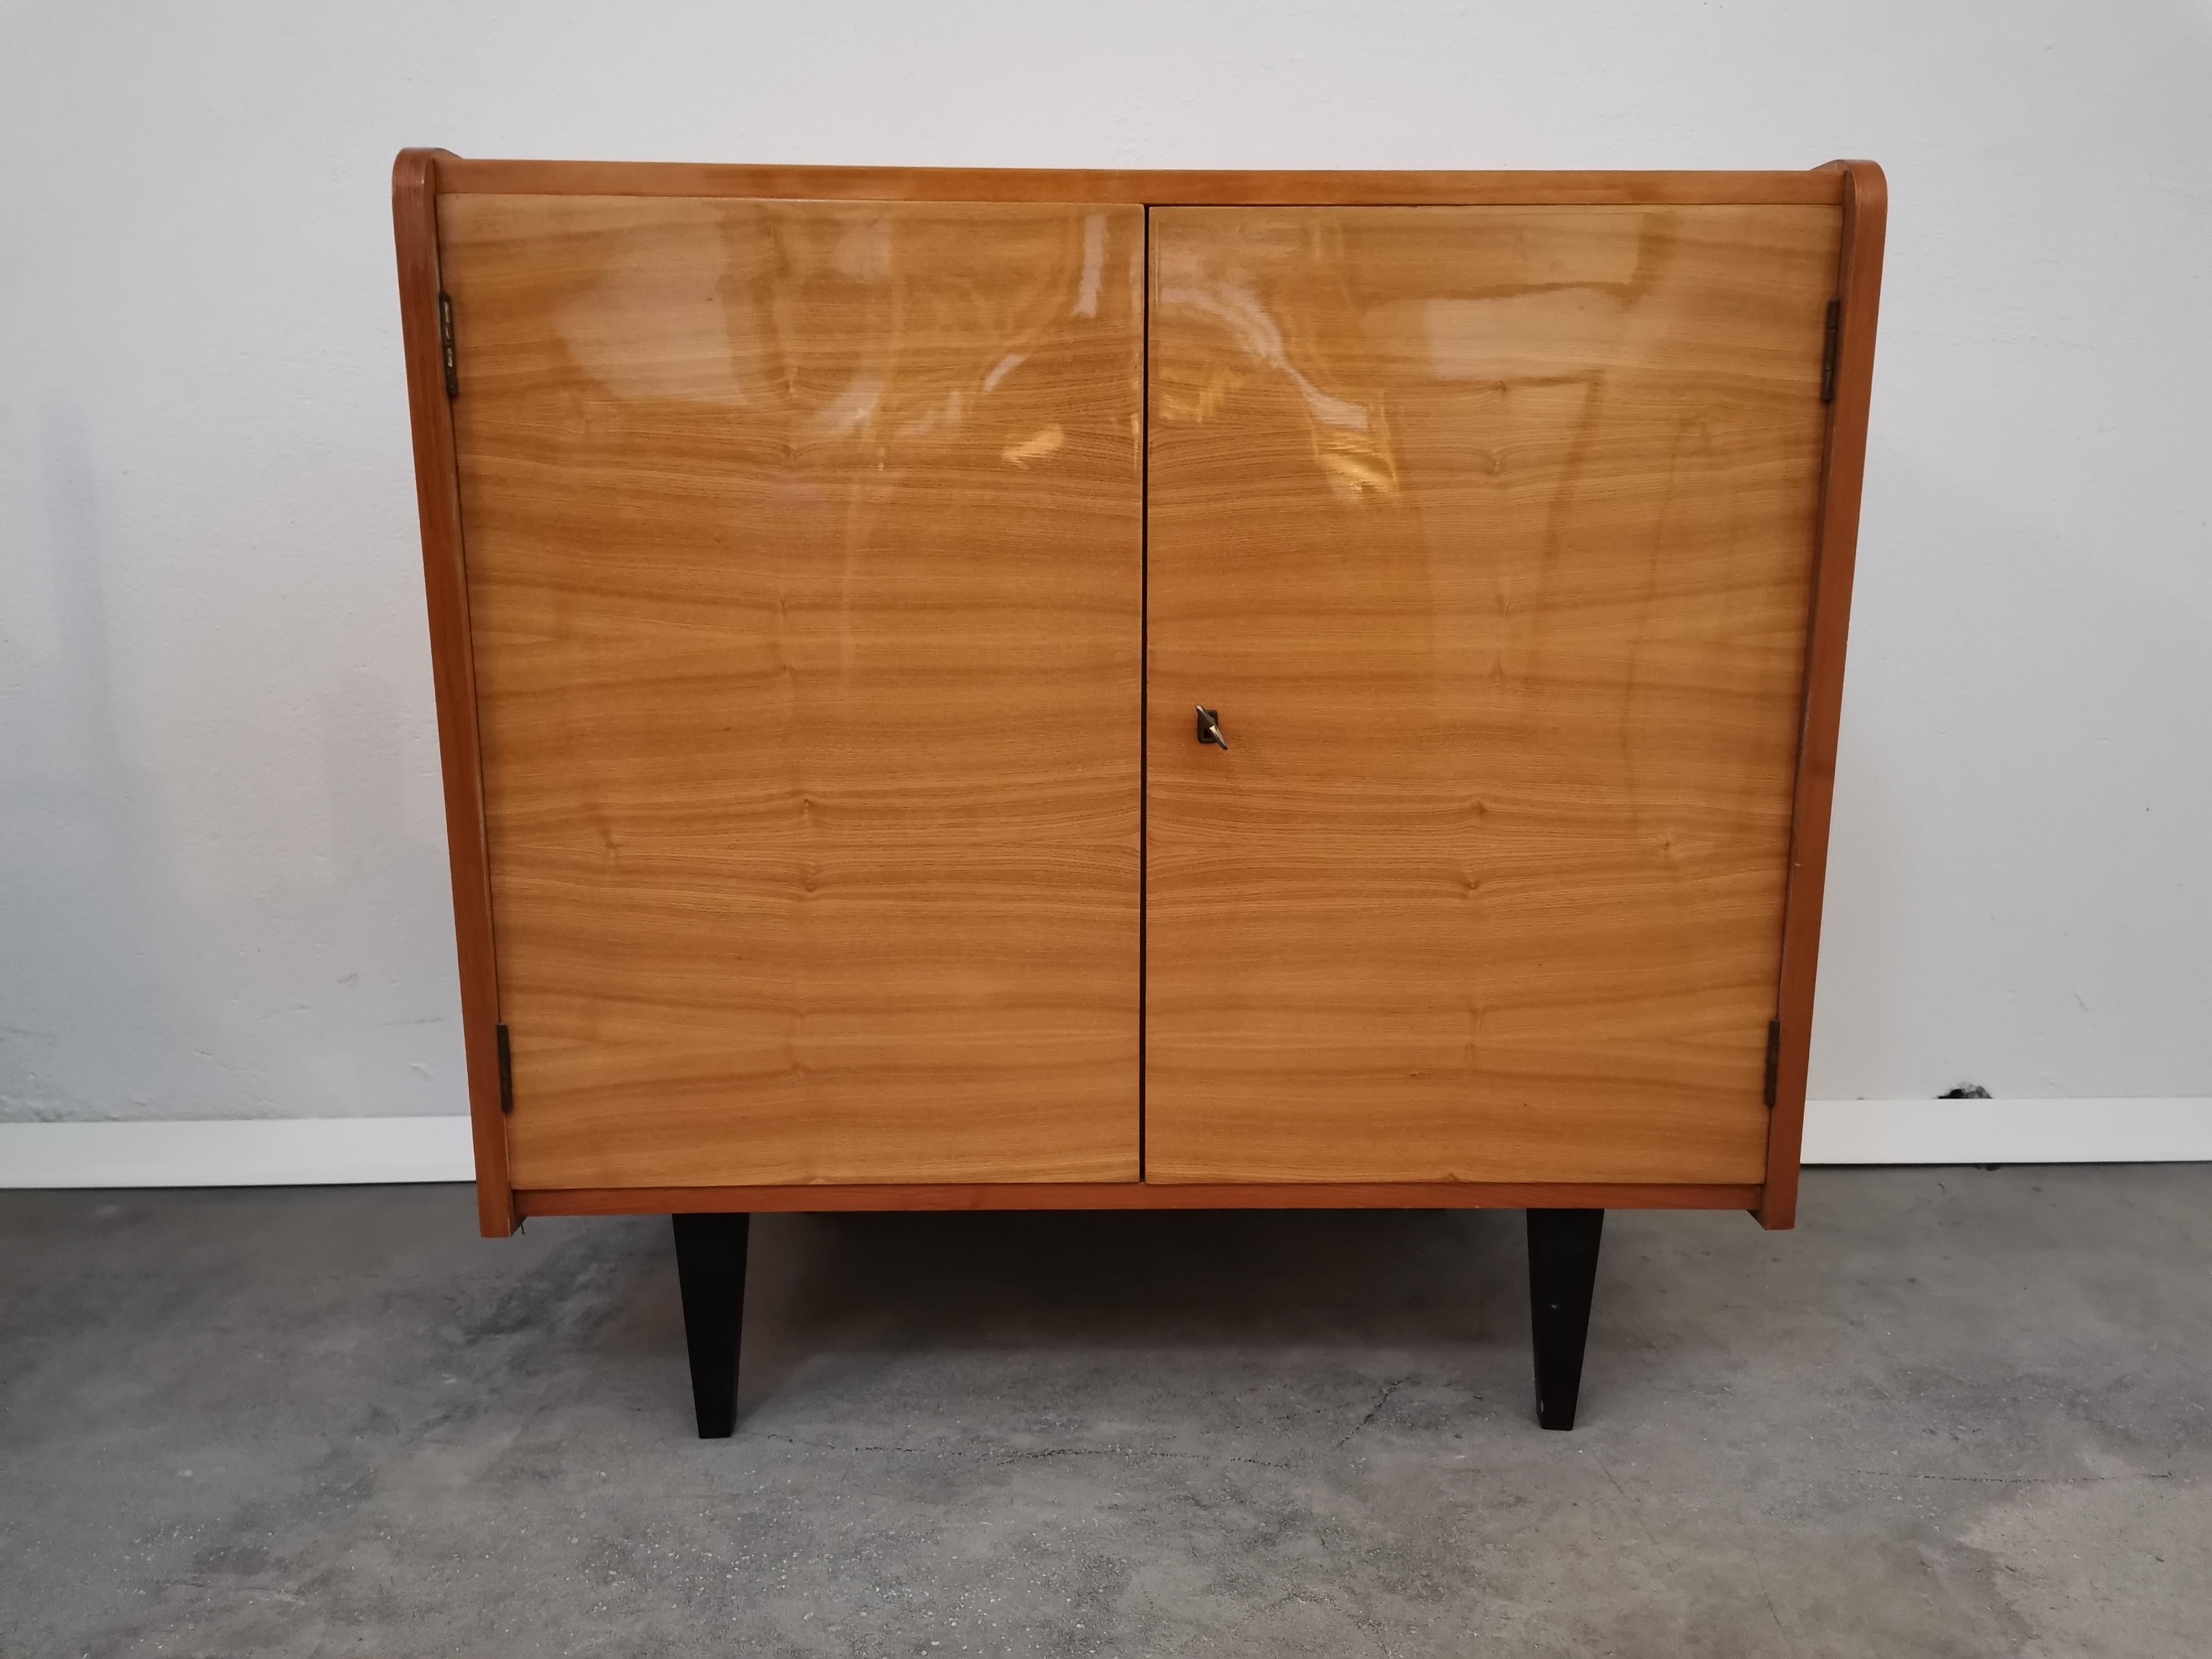 Vintage cabinet.
Period: 1960s
Style: midcentury modern, scandinavian.
Country of manufacturer: Slovenia/Yugoslavia.
Materials: Particle board, plywood, wood, laminated.
Colours: wood, clear.